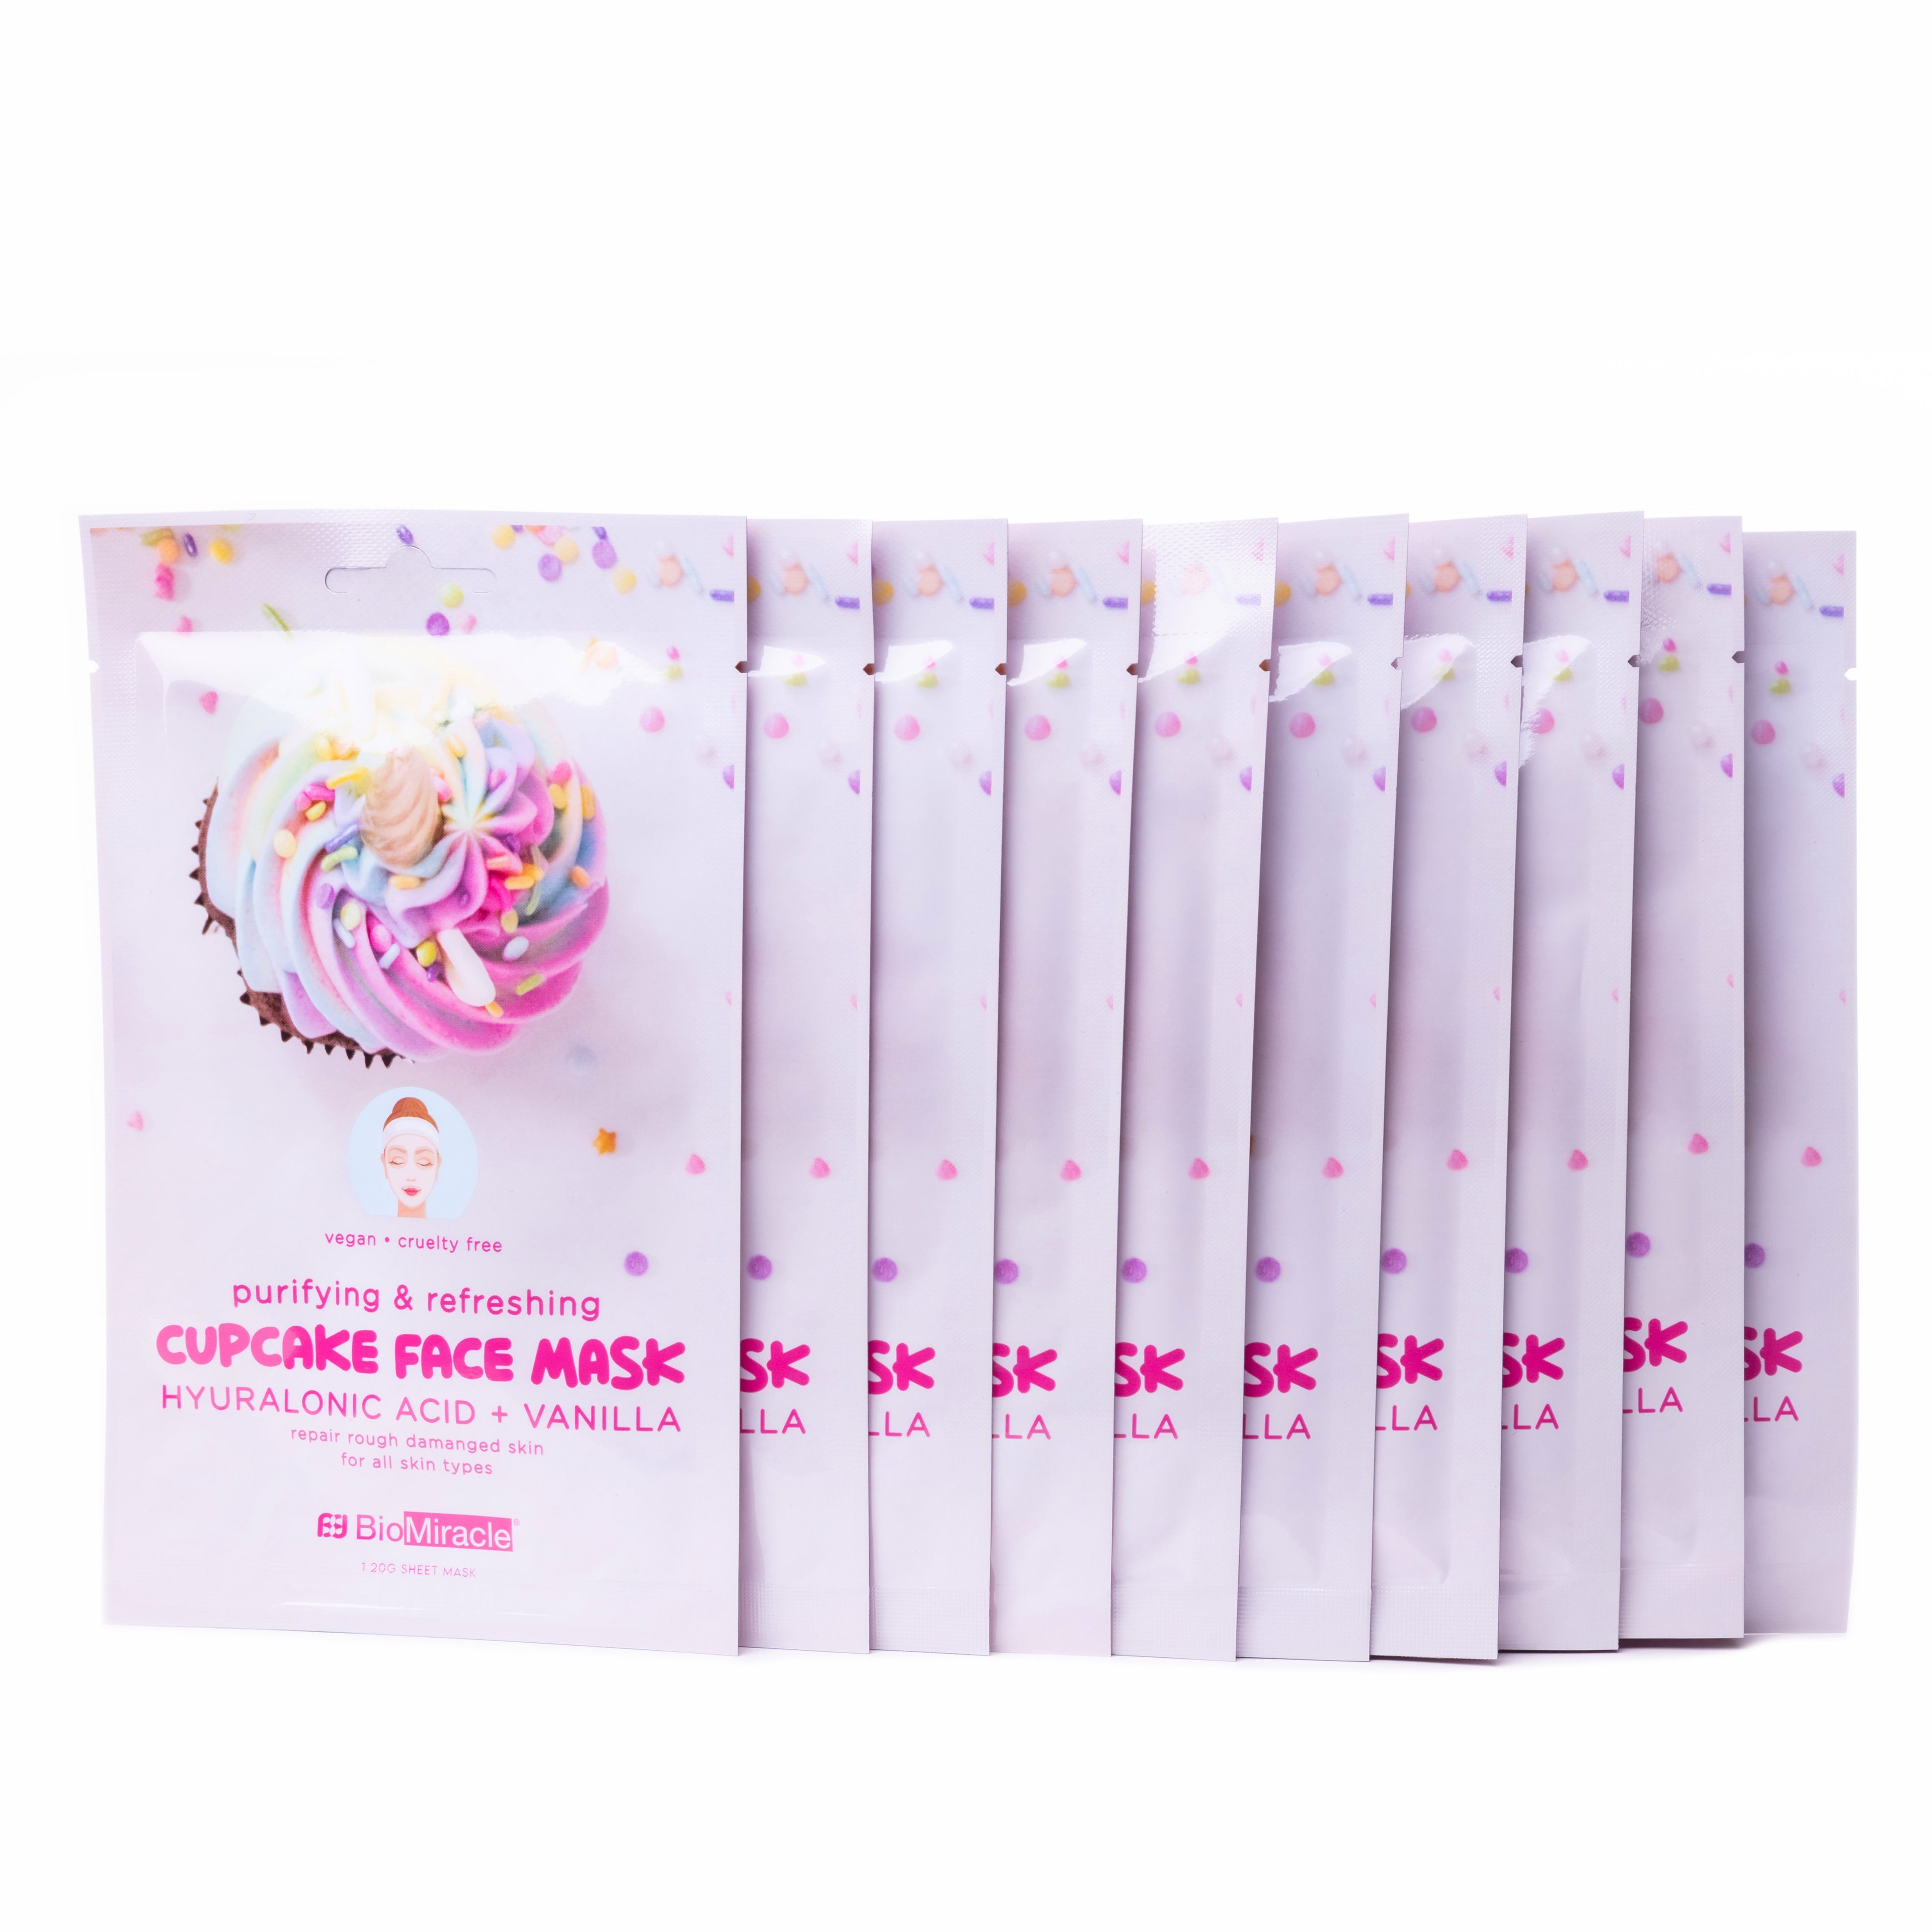 Purifying and Refreshing Cupcake Face Mask 10 Pack